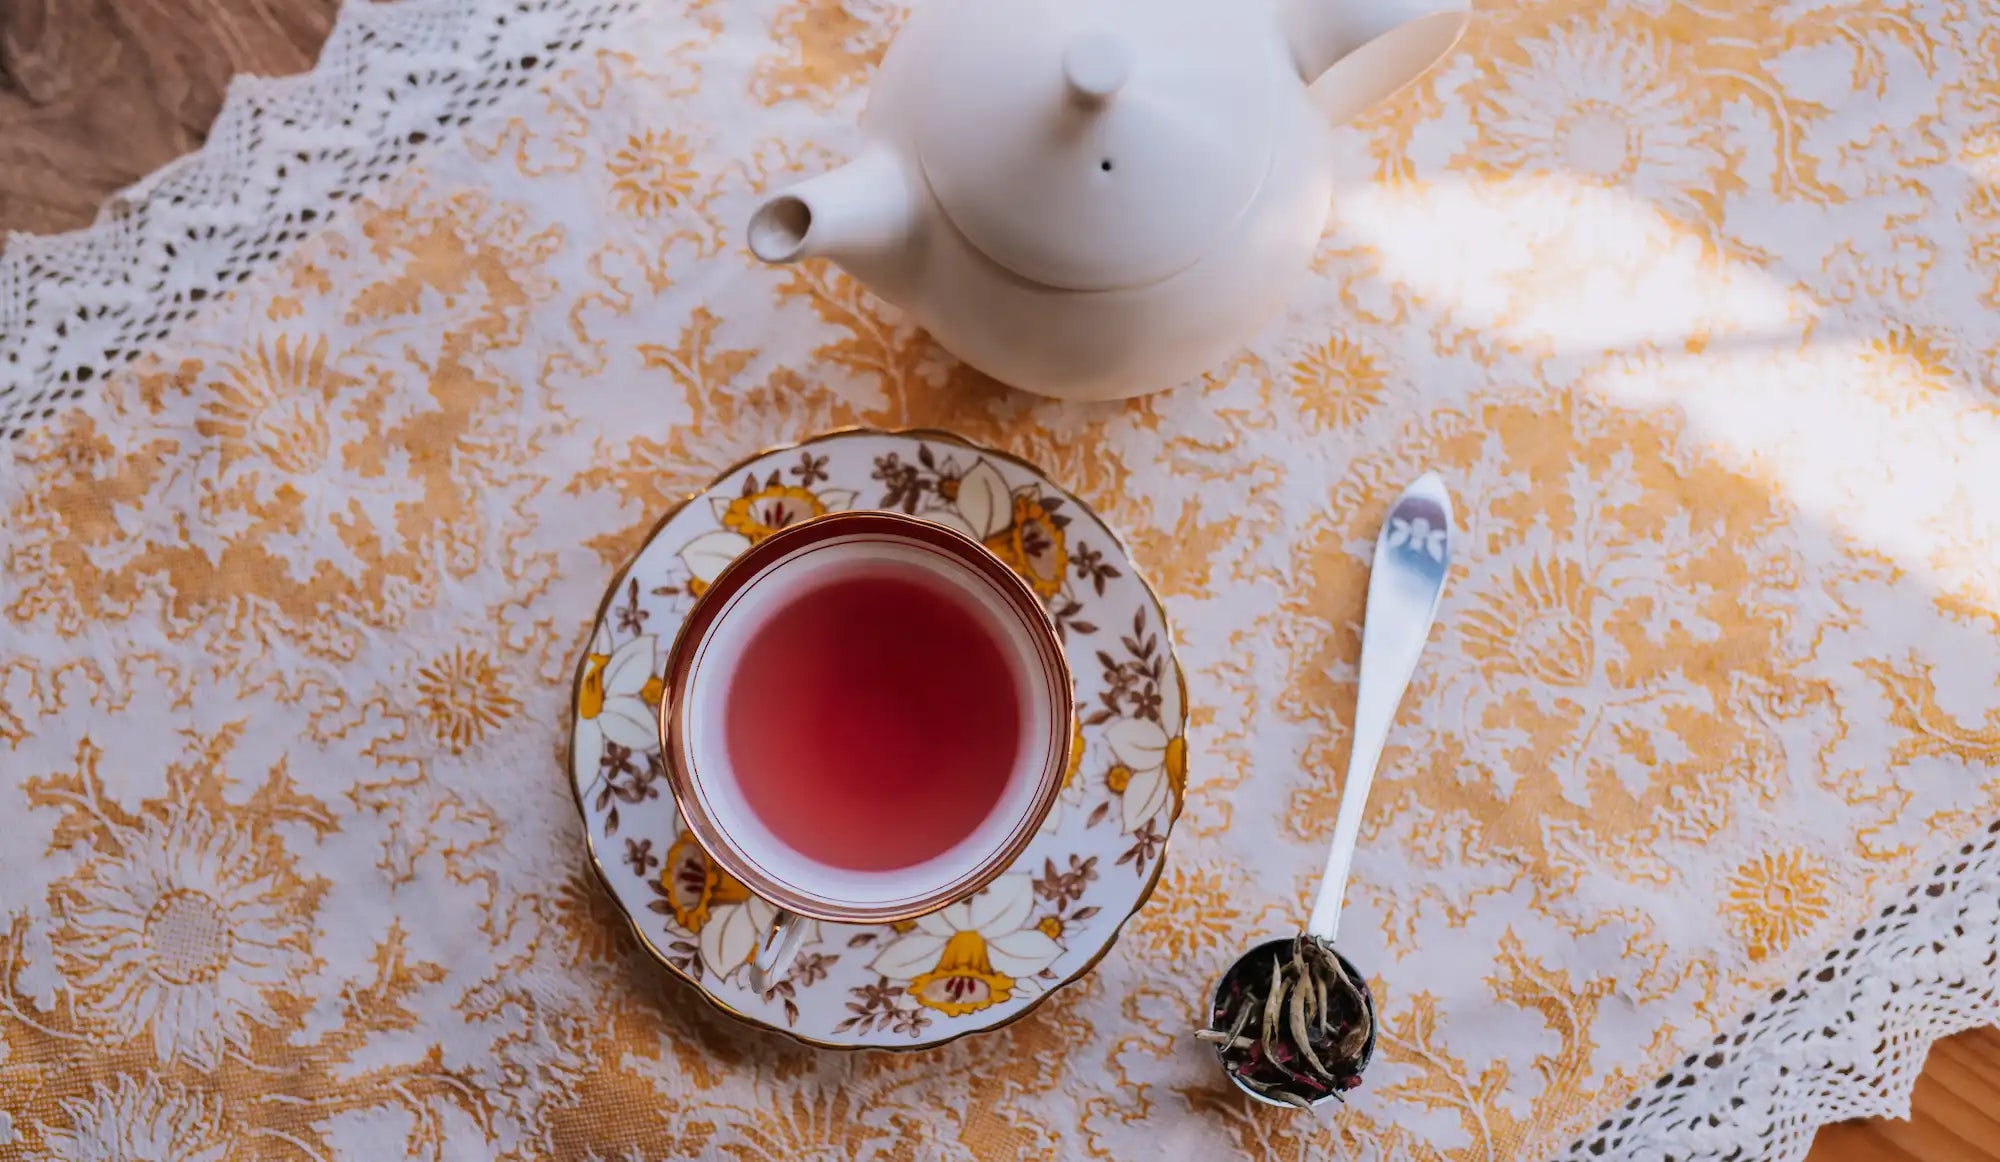 canfield in red fruit scented tea in a vintage teacup on a yellow and white patterned tablecloth